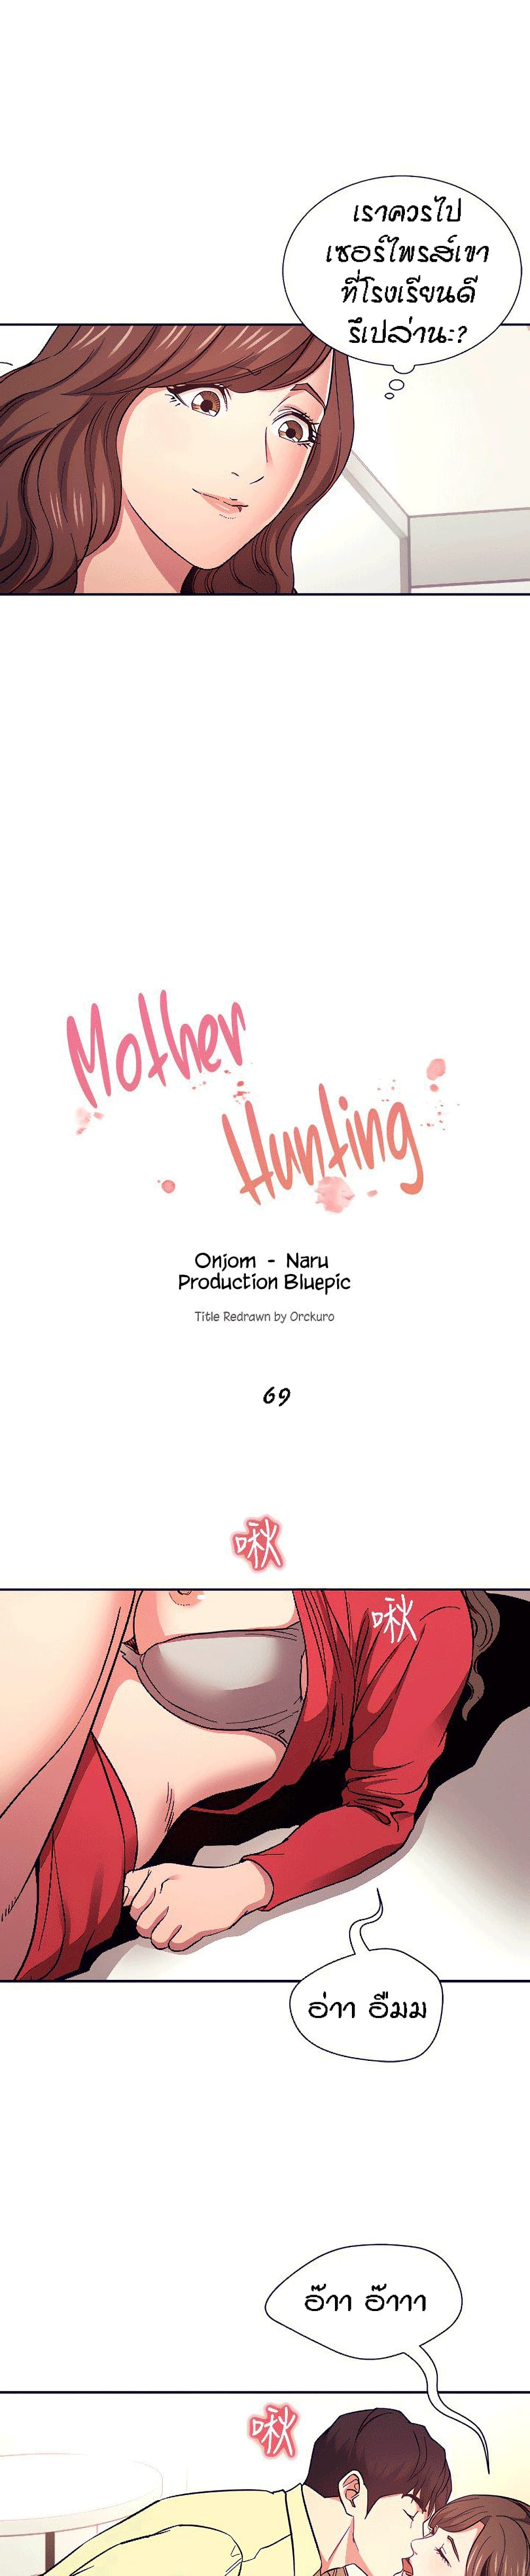 Mother Hunting 69 02